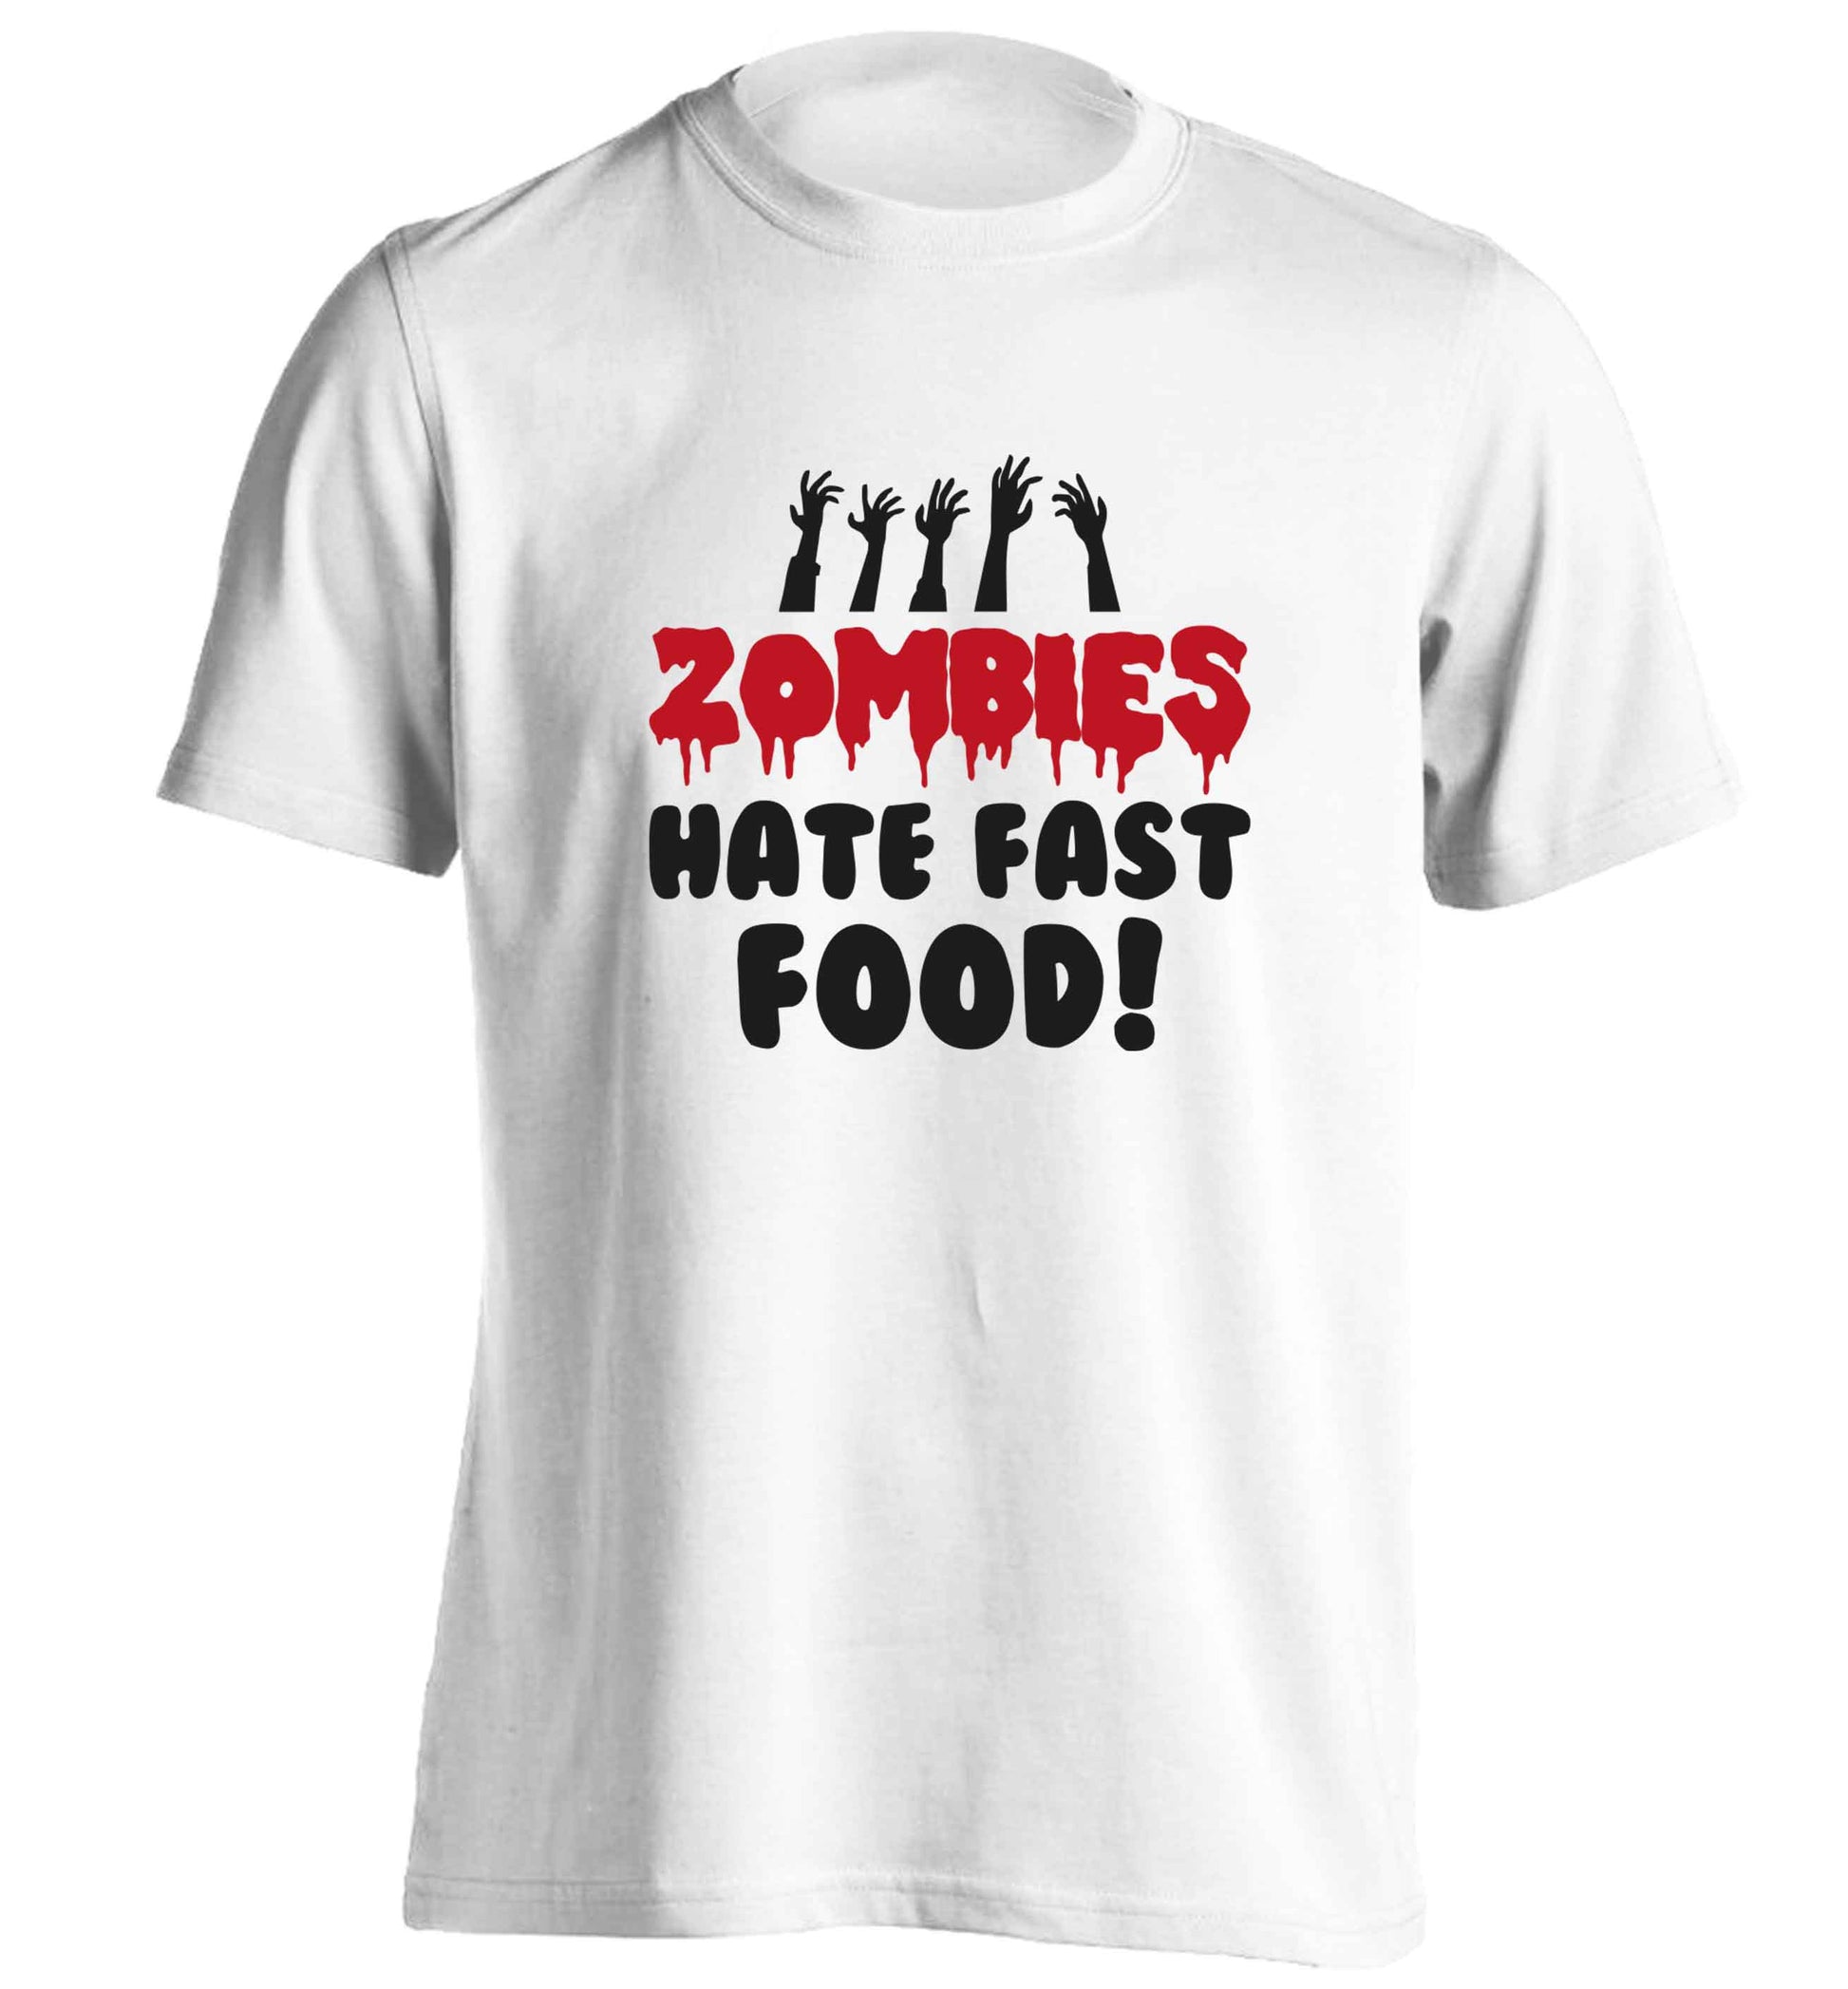 Zombies hate fast food adults unisex white Tshirt 2XL